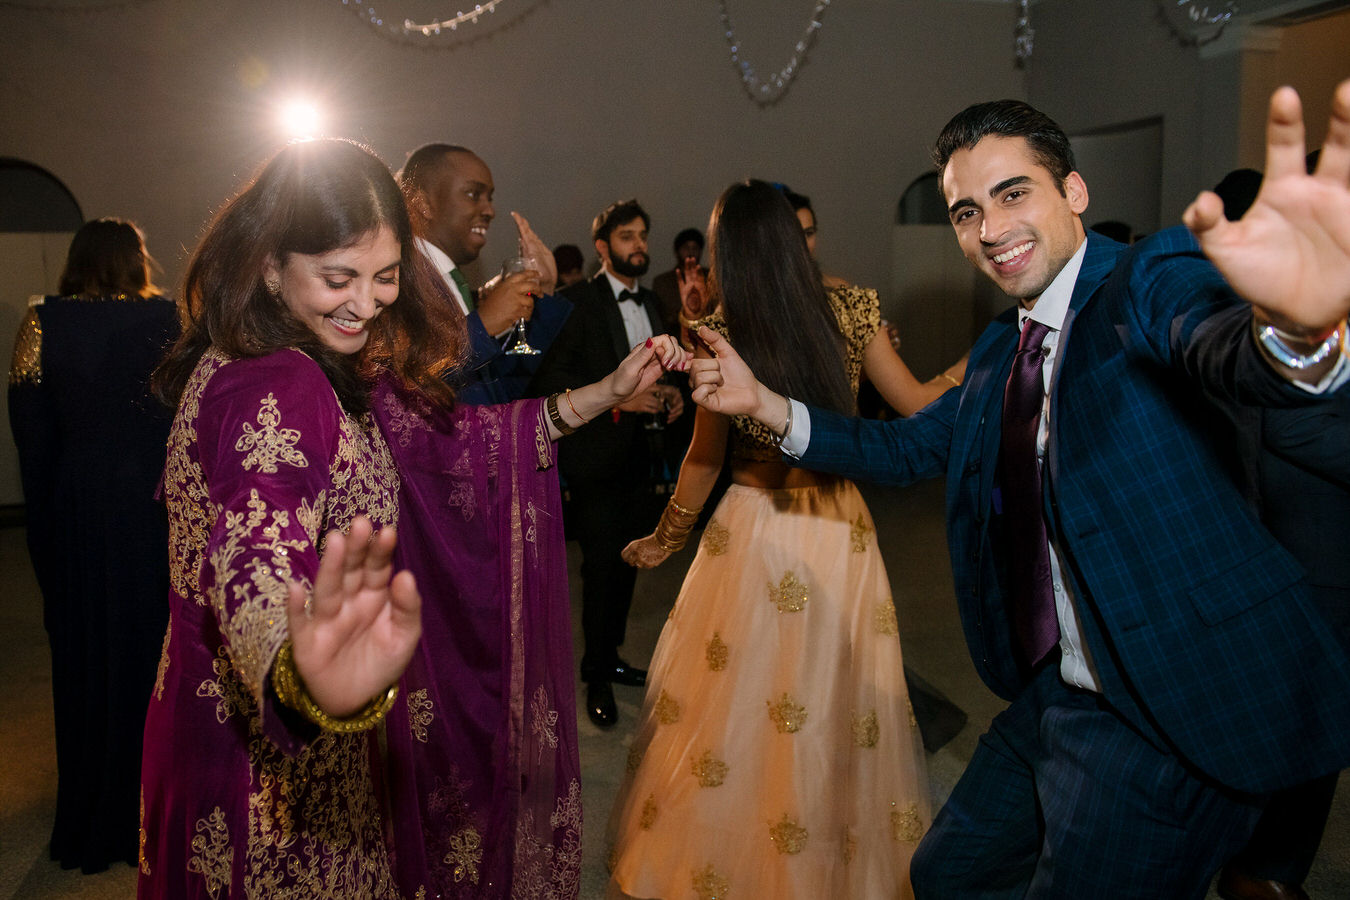 Wedding guests are dancing and feeling good at the Sikh Asian wedding.